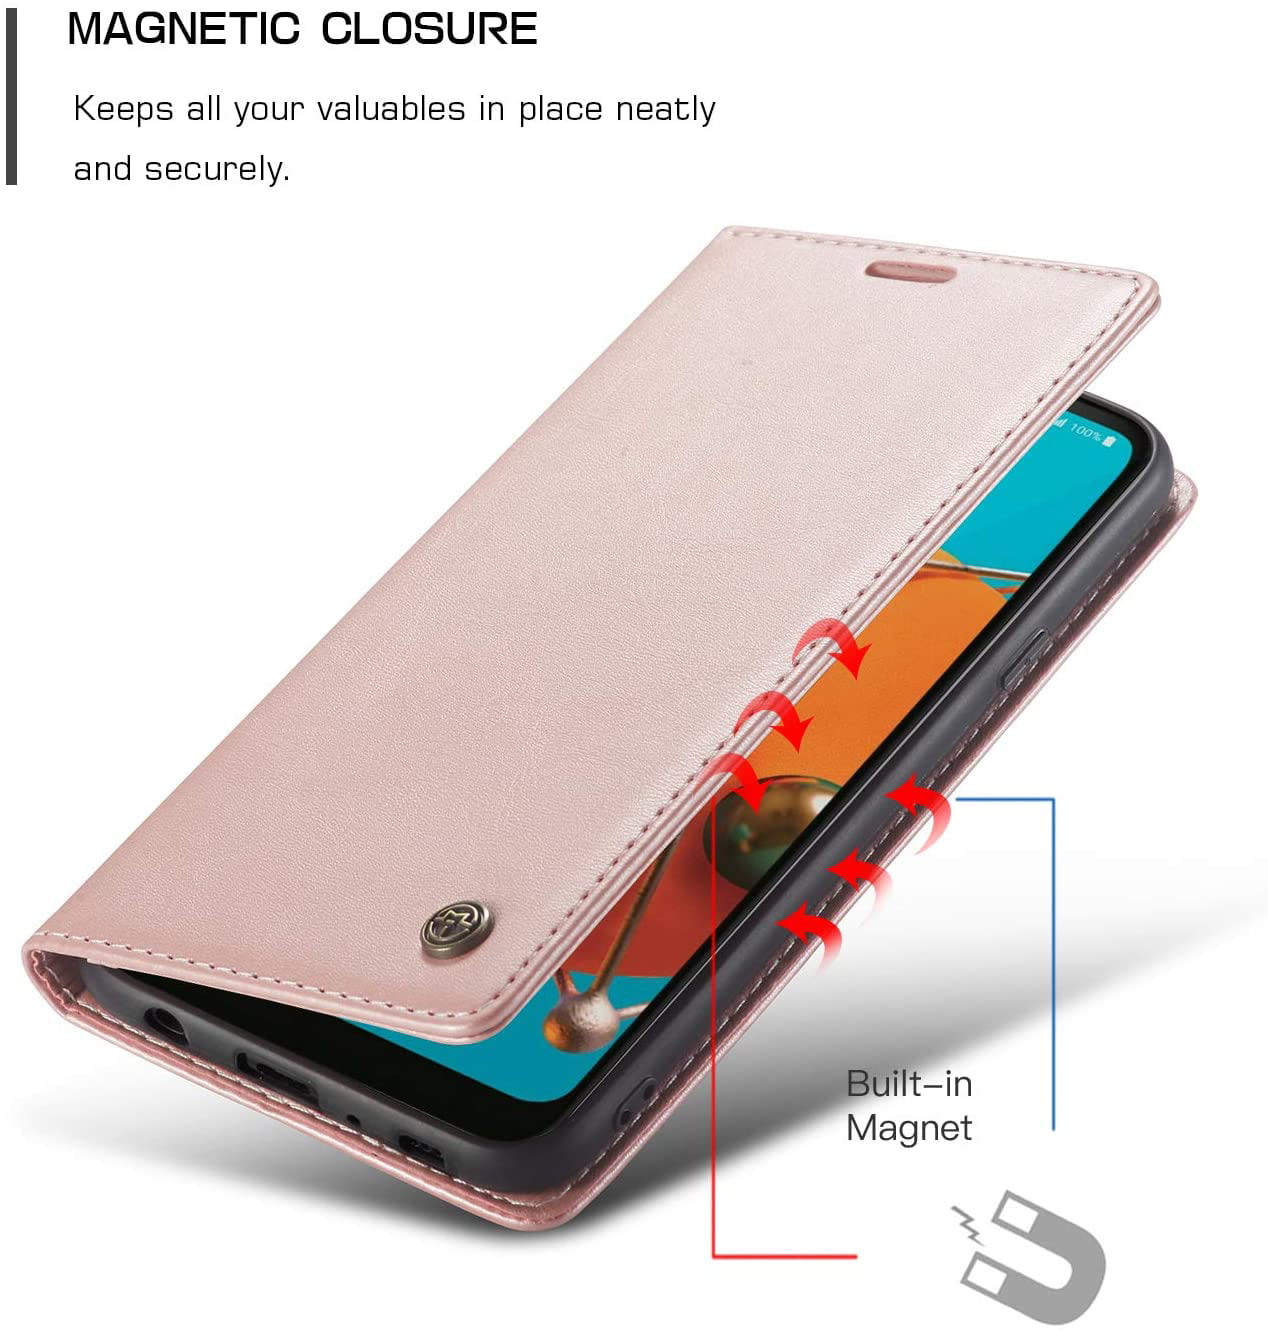 Brown Galaxy A71 Case,Bpowe Leather Wallet Case Classic Design with Card Slot and Magnetic Closure Flip Fold Case for Samsung Galaxy A71